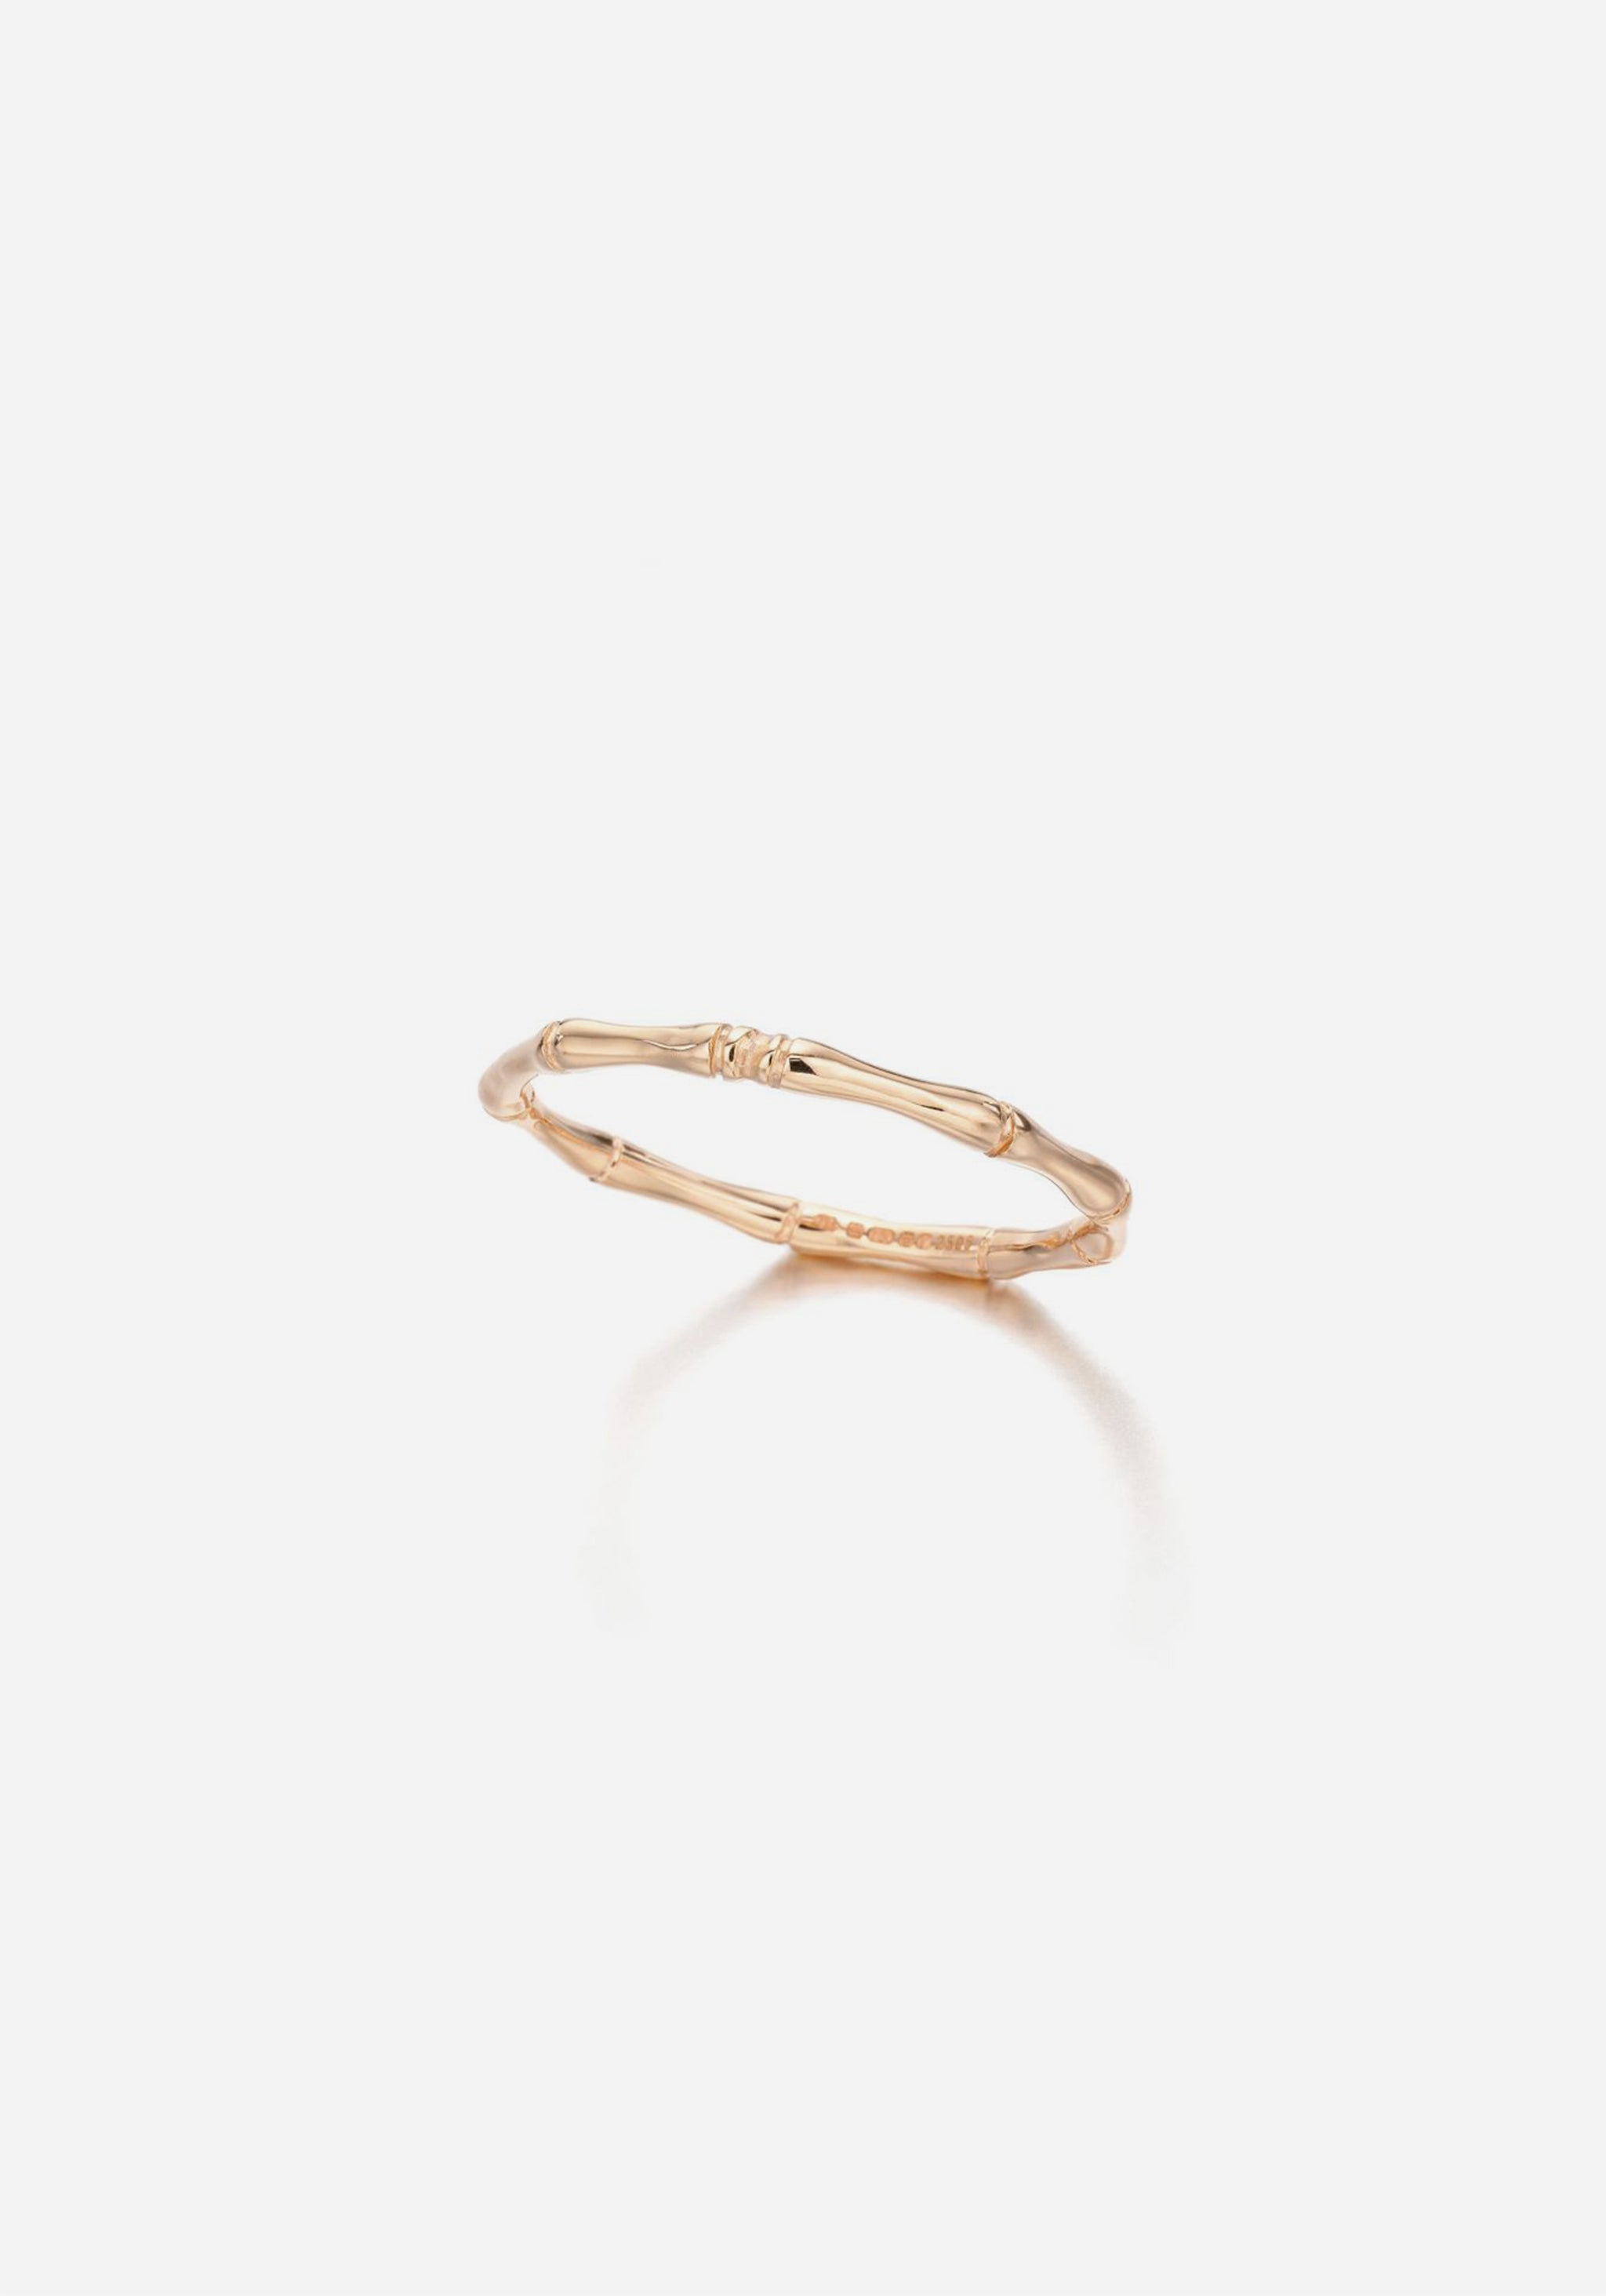 Bamboo Ring - Fine Band Rose Gold